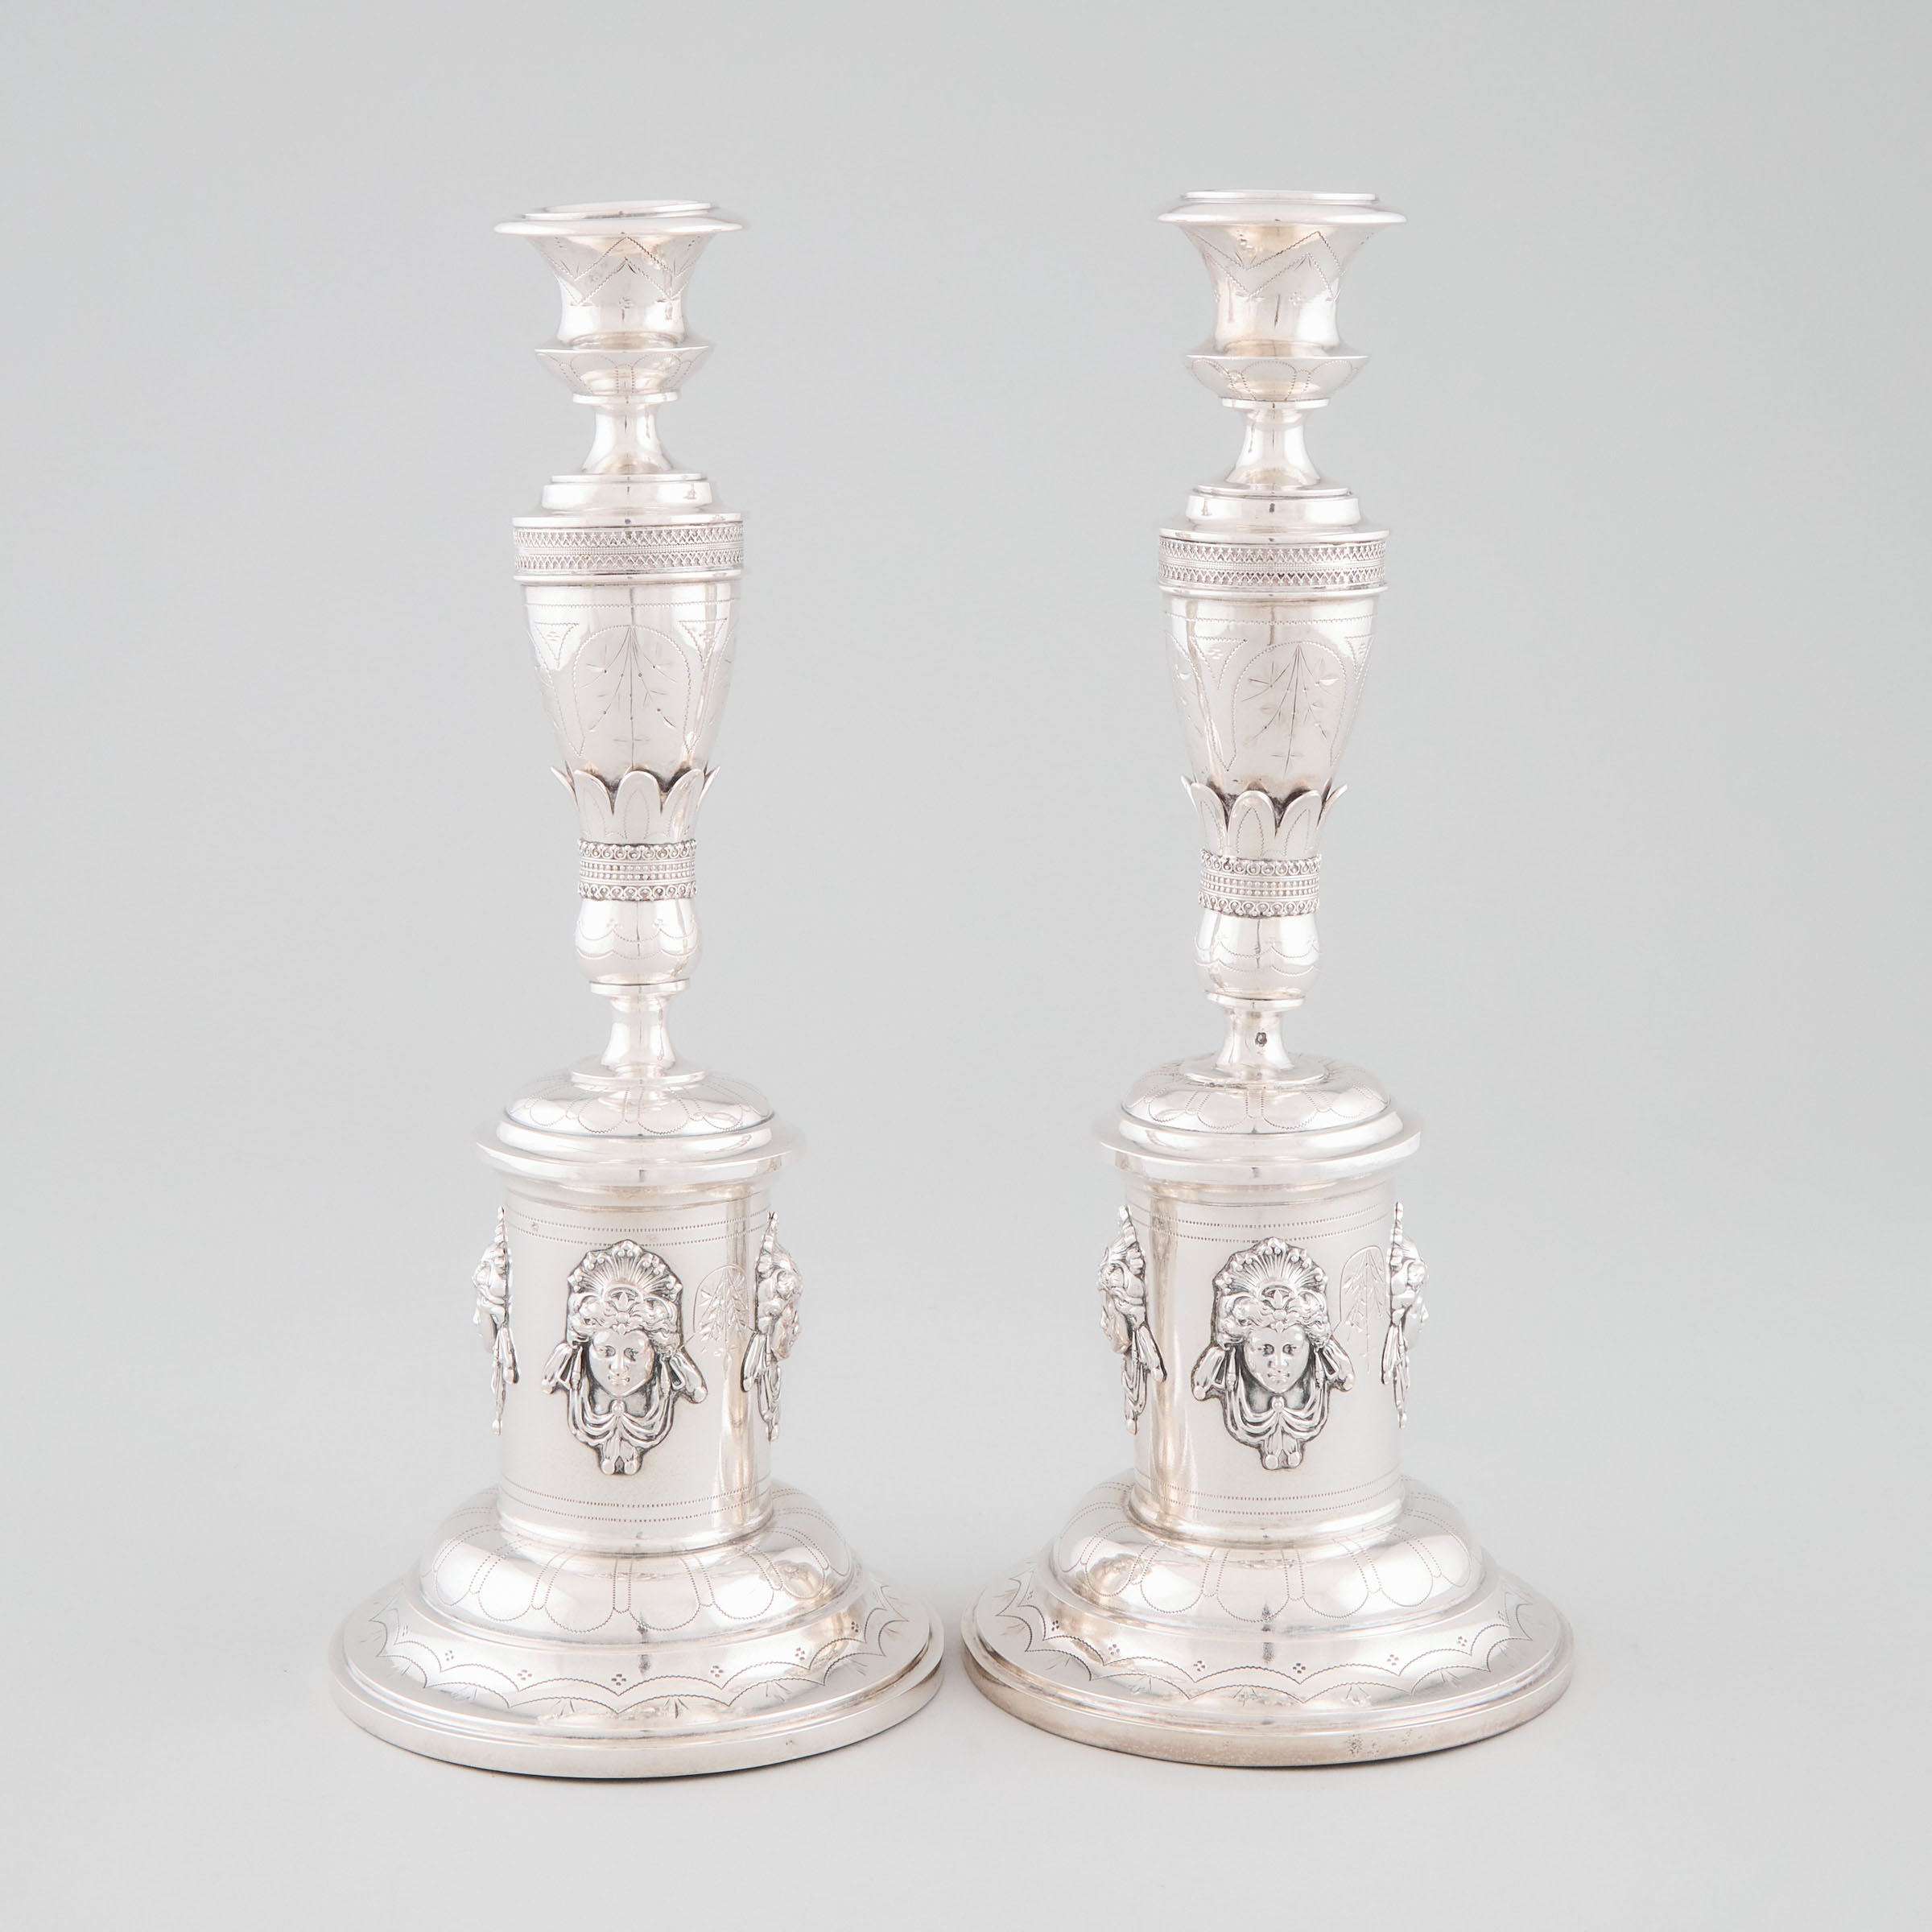 Pair of Austro-Hungarian Silver